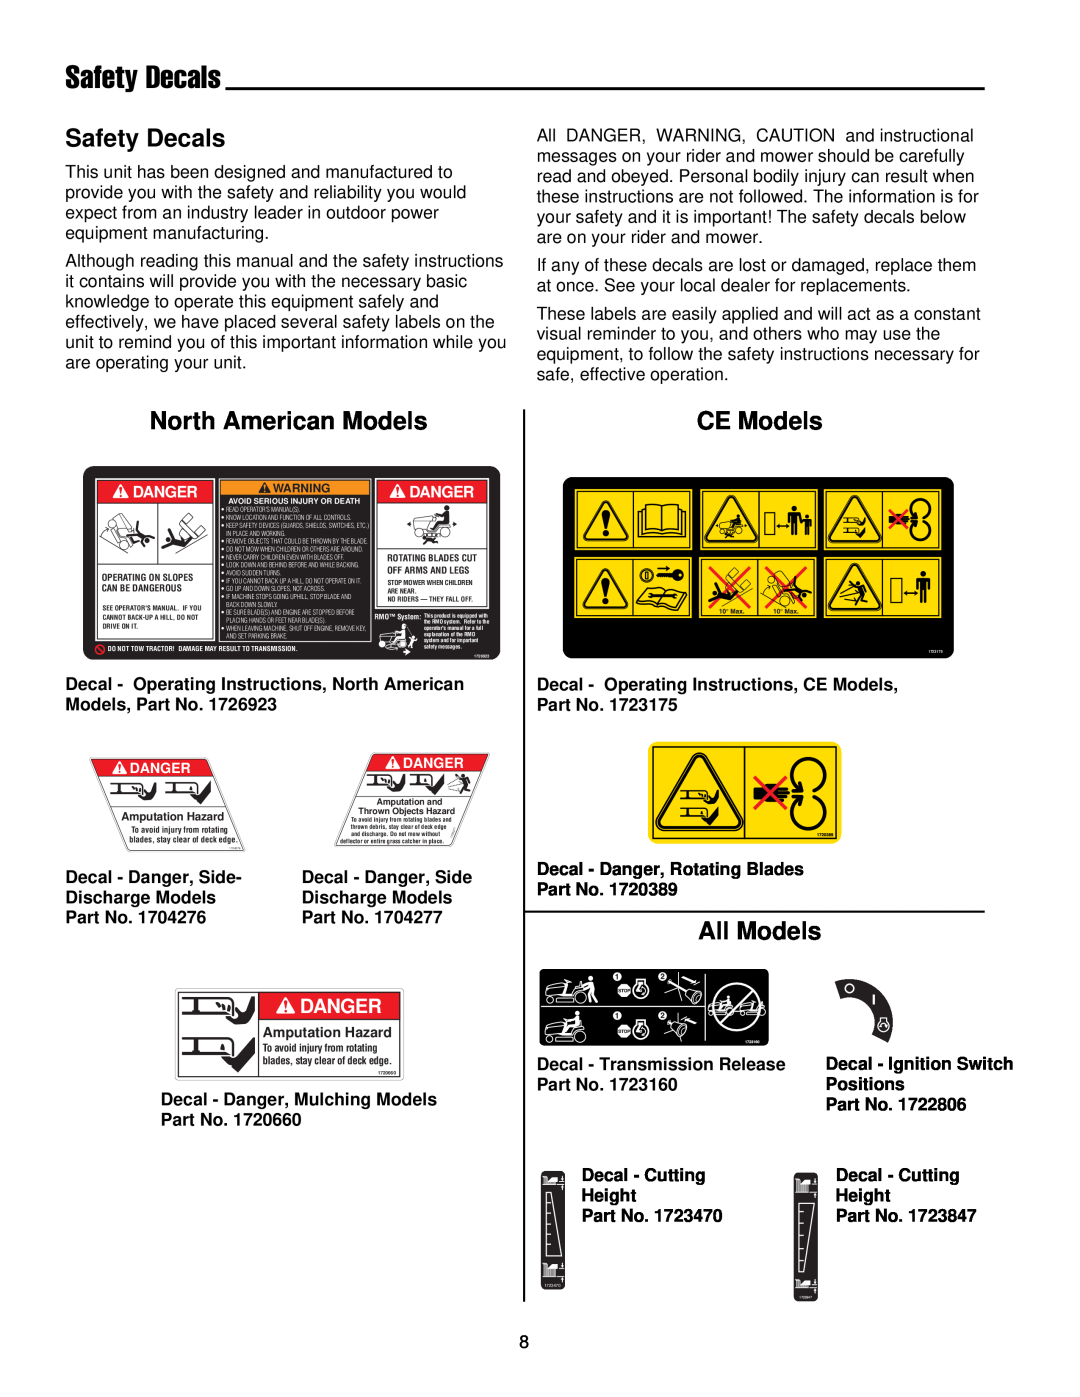 Simplicity 300 Series manual Safety Decals, North American Models, All Models, CE Models, Danger 